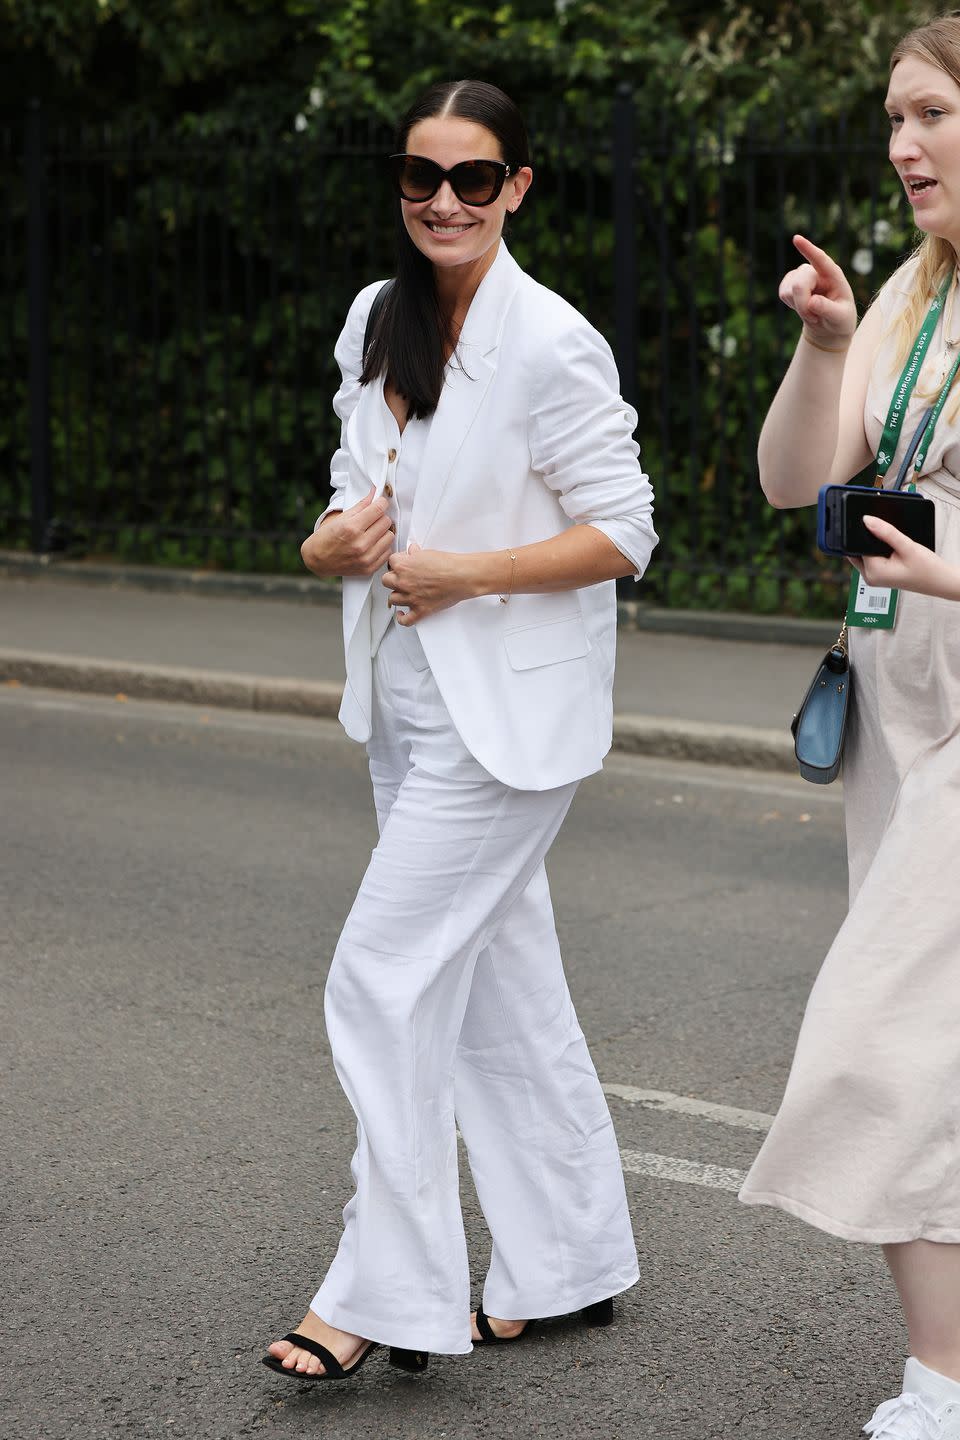 kirsty gallagher attends day one of the wimbledon tennis championships